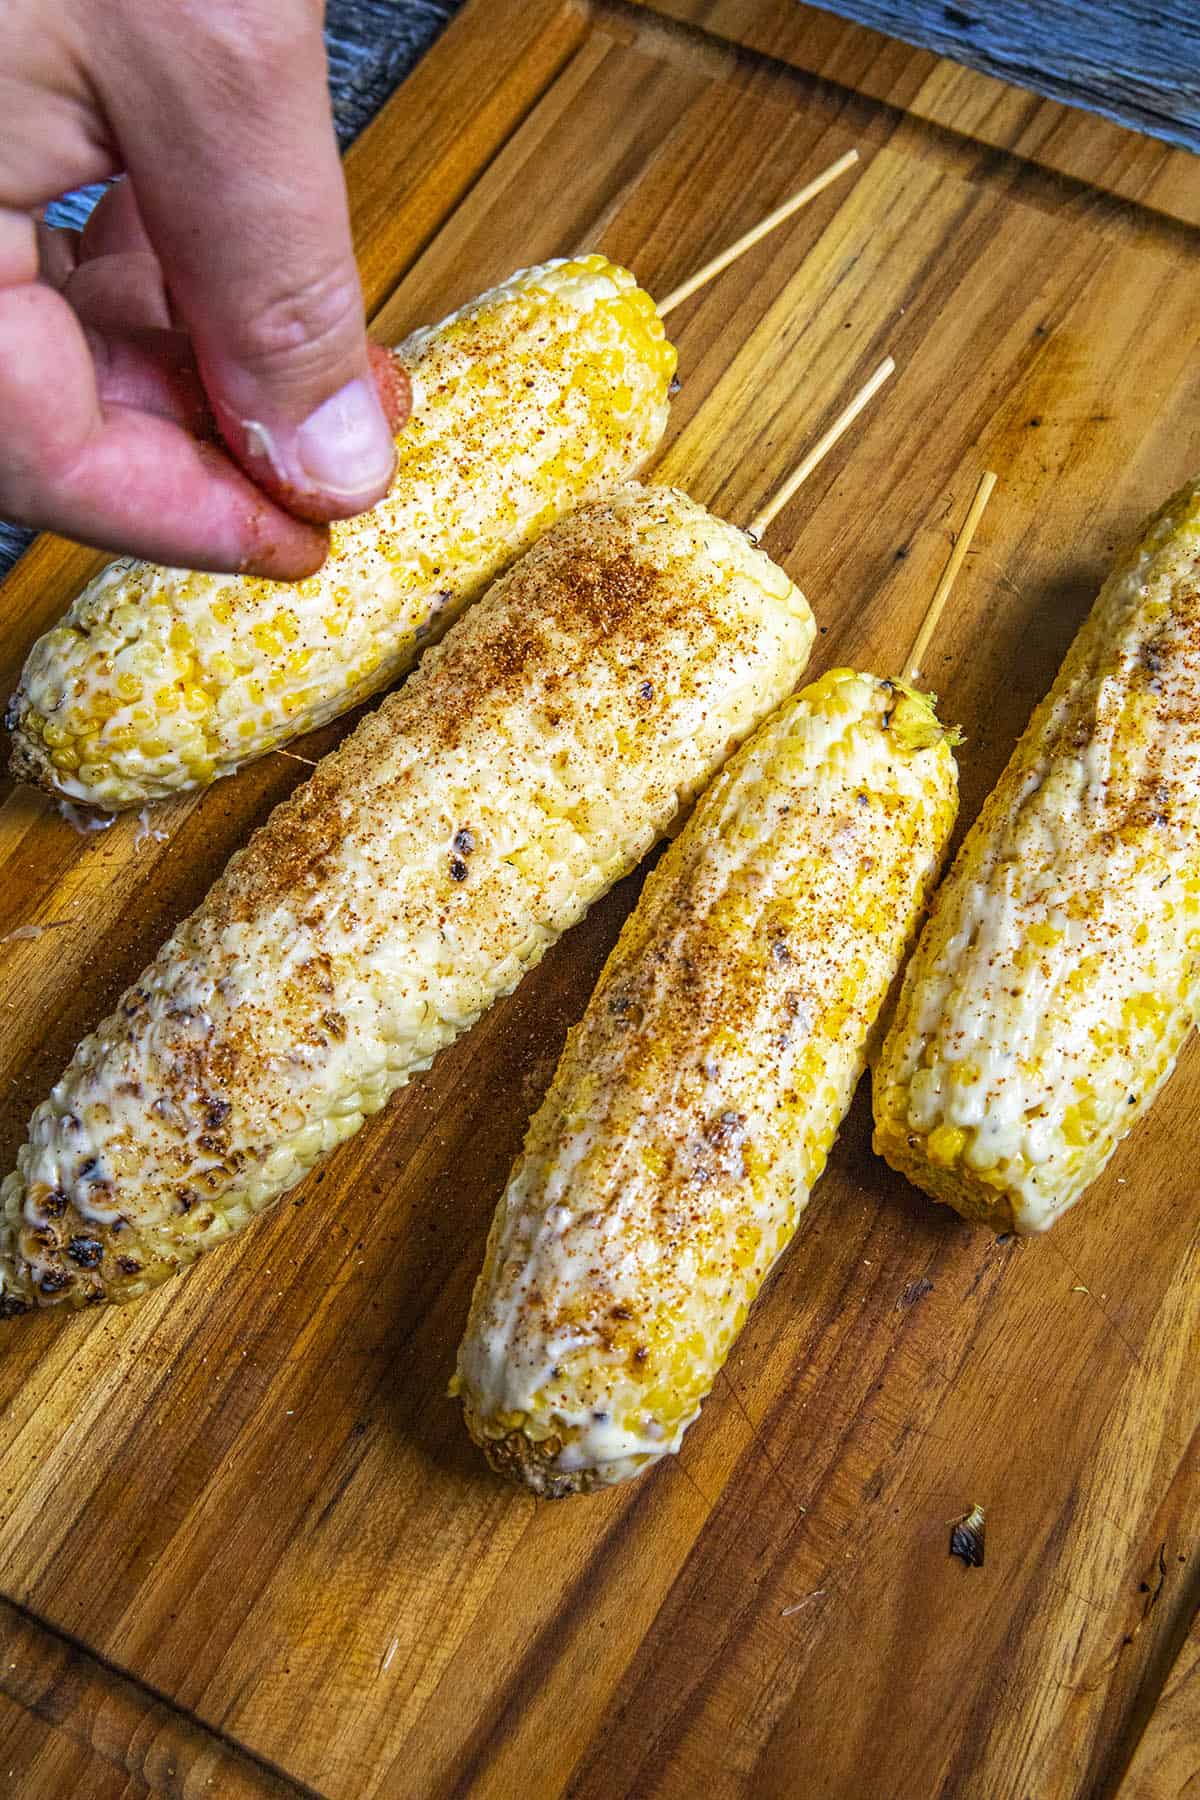 Coating the grilled corn with seasonings